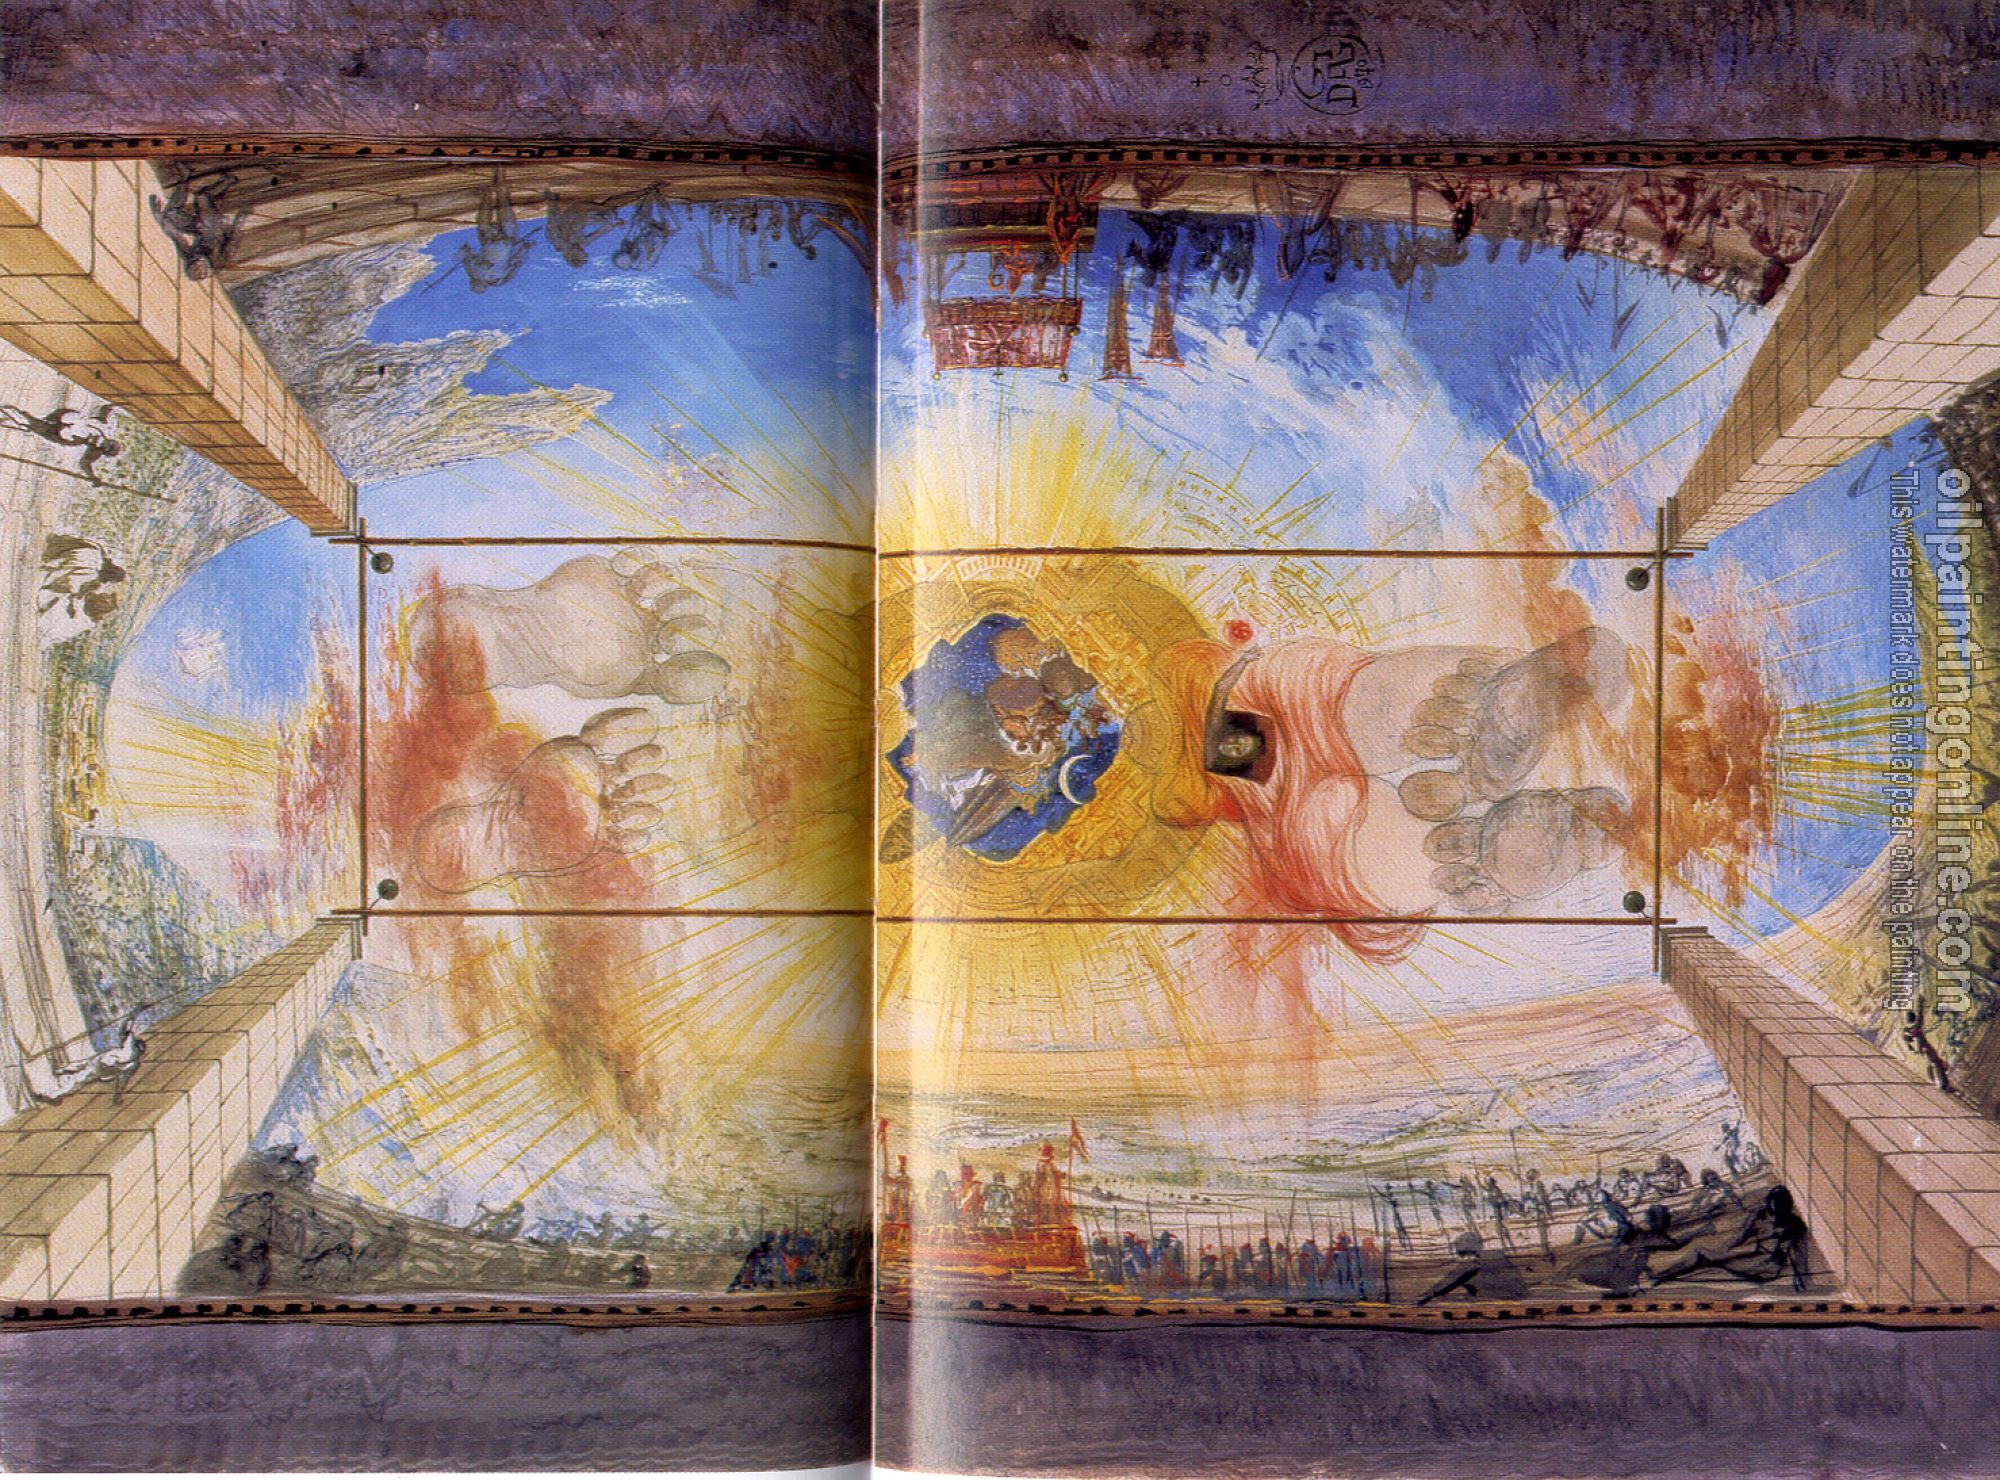 Dali, Salvador - Sketch for a ceiling of the Teatro Museo Dali